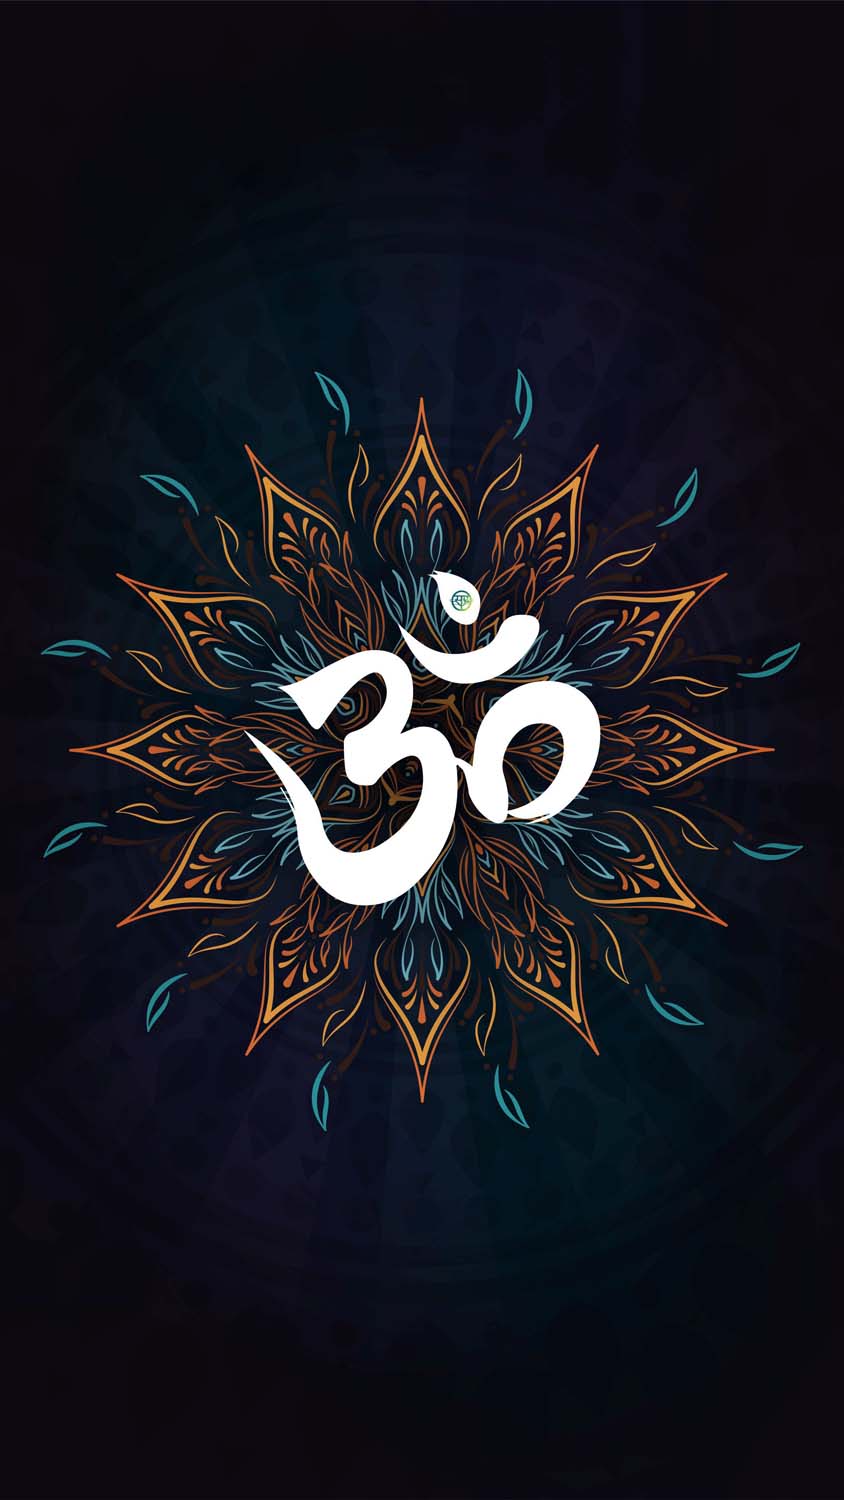 OM IPhone Wallpaper HD - IPhone Wallpapers : iPhone Wallpapers